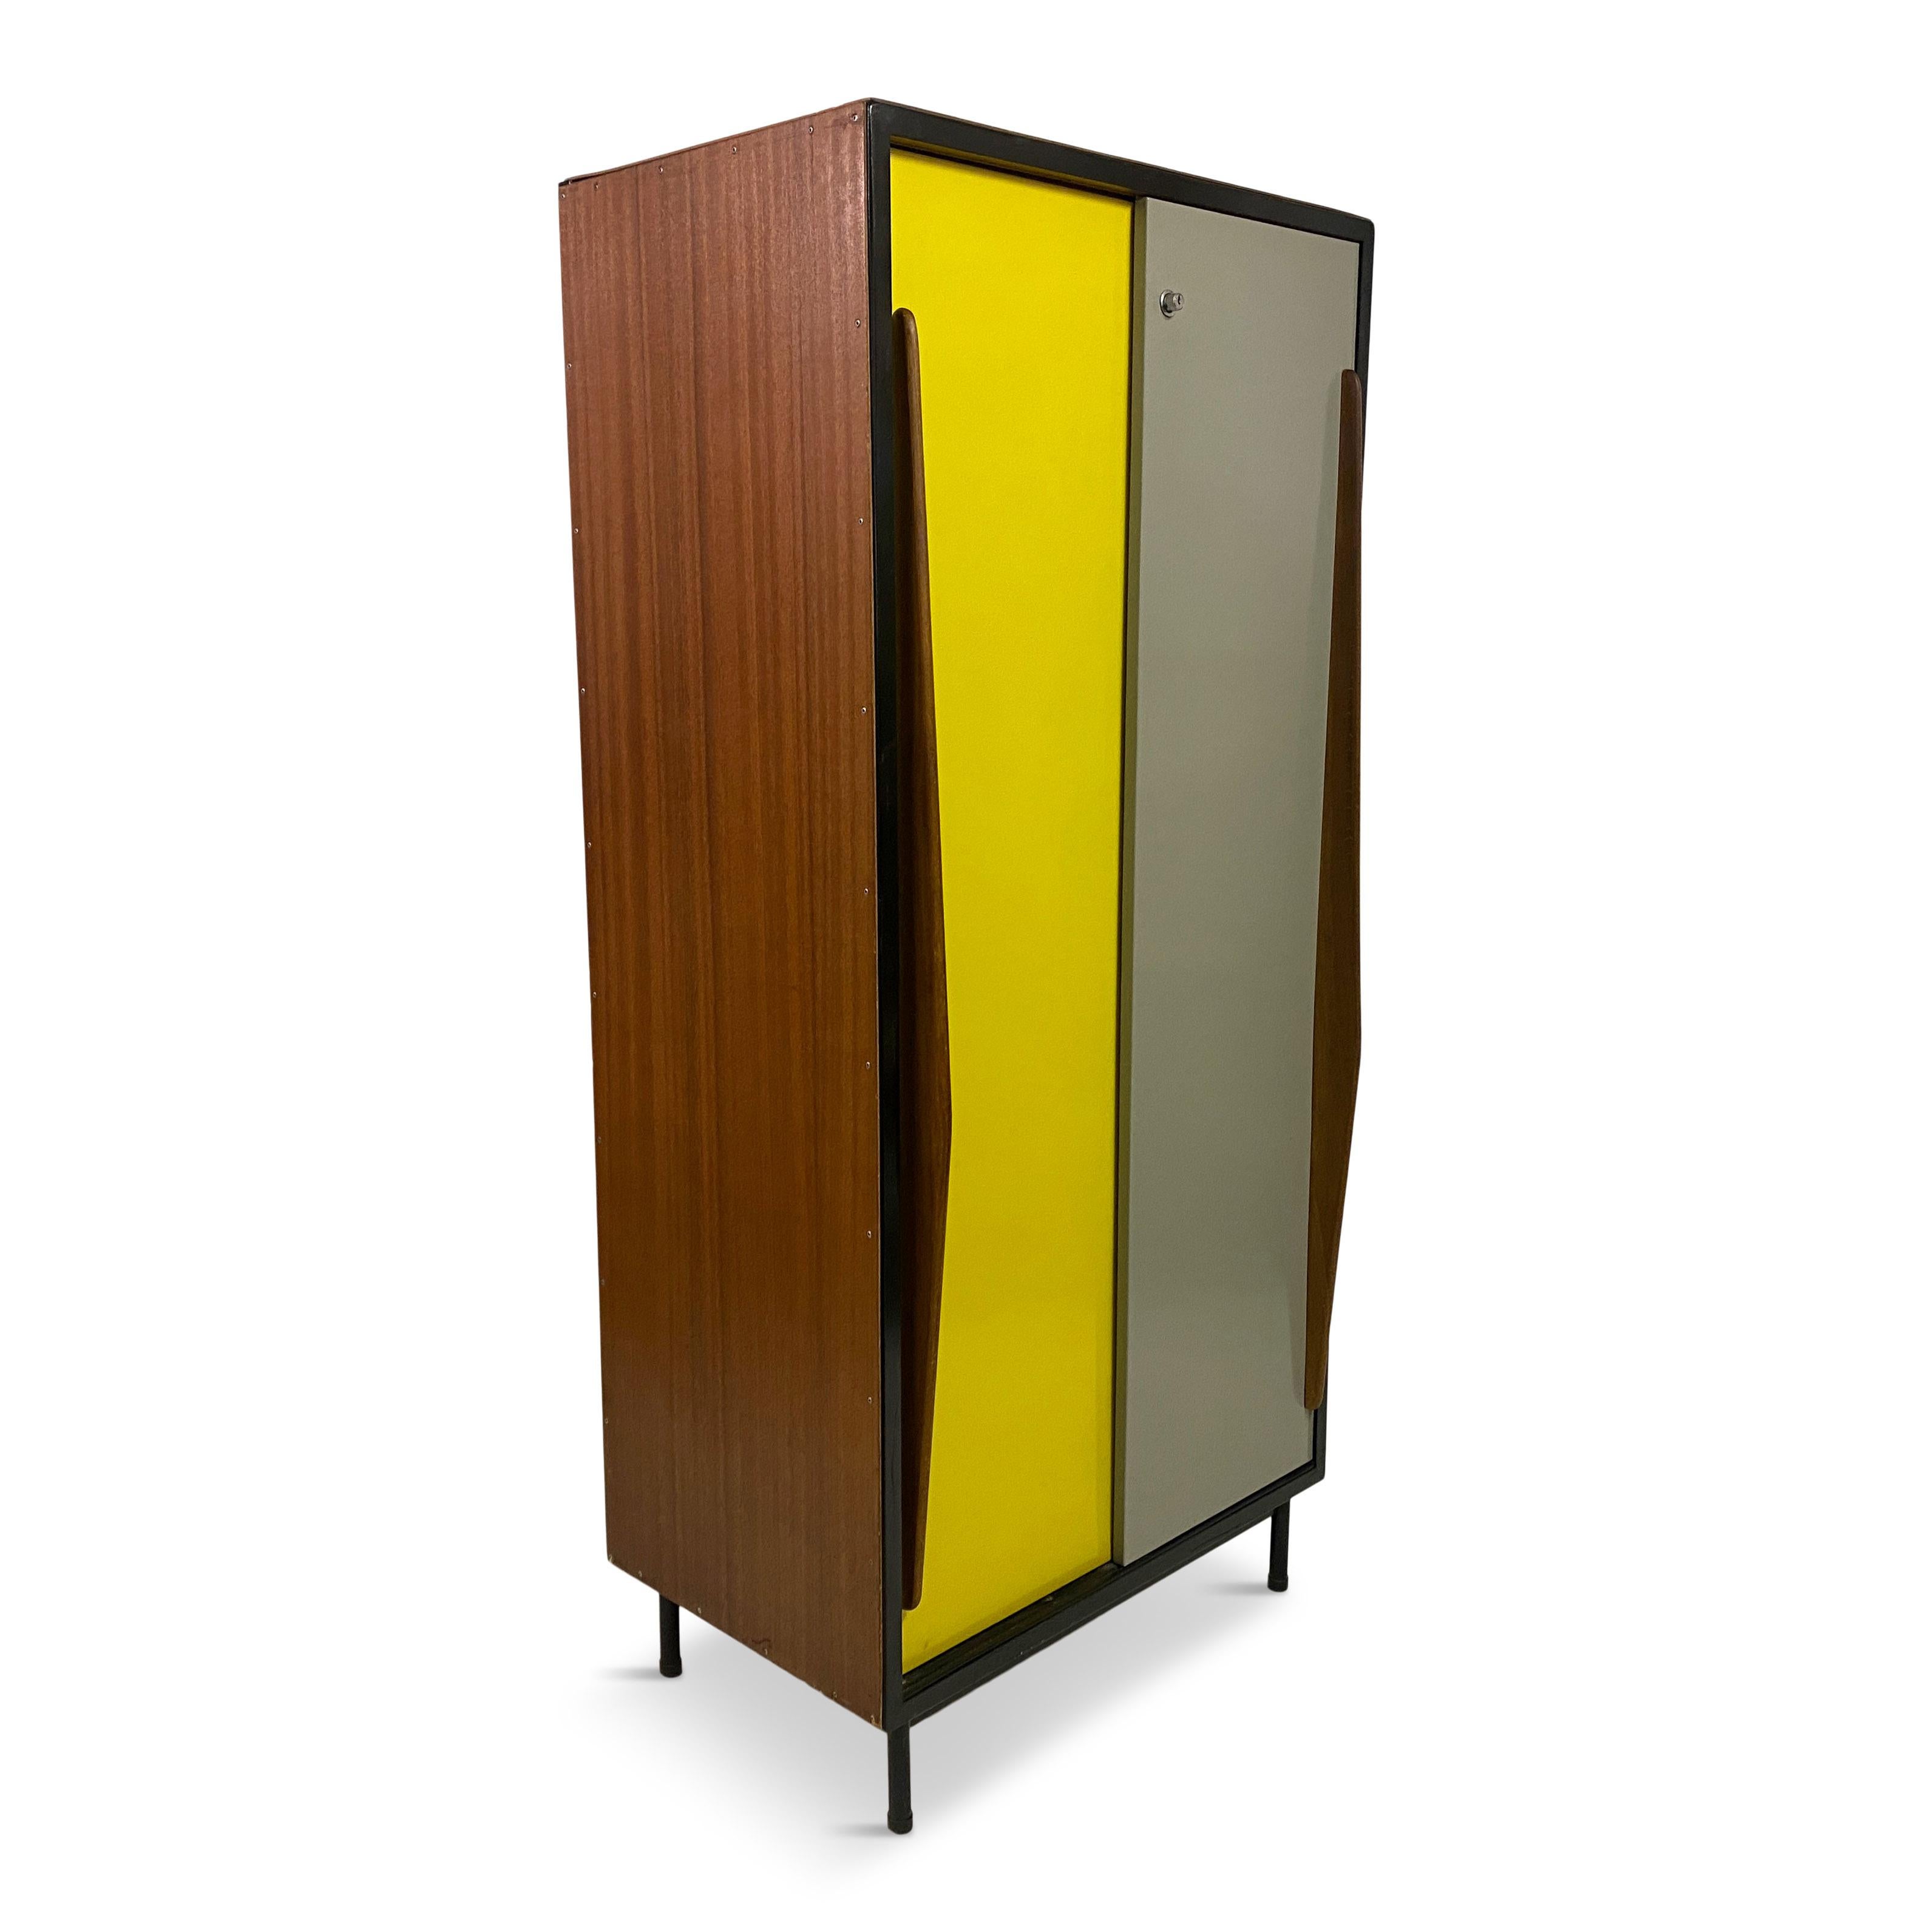 Cabinet or wardrobe 

By Willy Van der Meeren

For Tubax

Two sliding metal doors - yellow and grey

Wooden sides

Black metal frame

Tapering wooden handles

Hanging rail and shelves

Belgium 1950s

Another cabinet available 